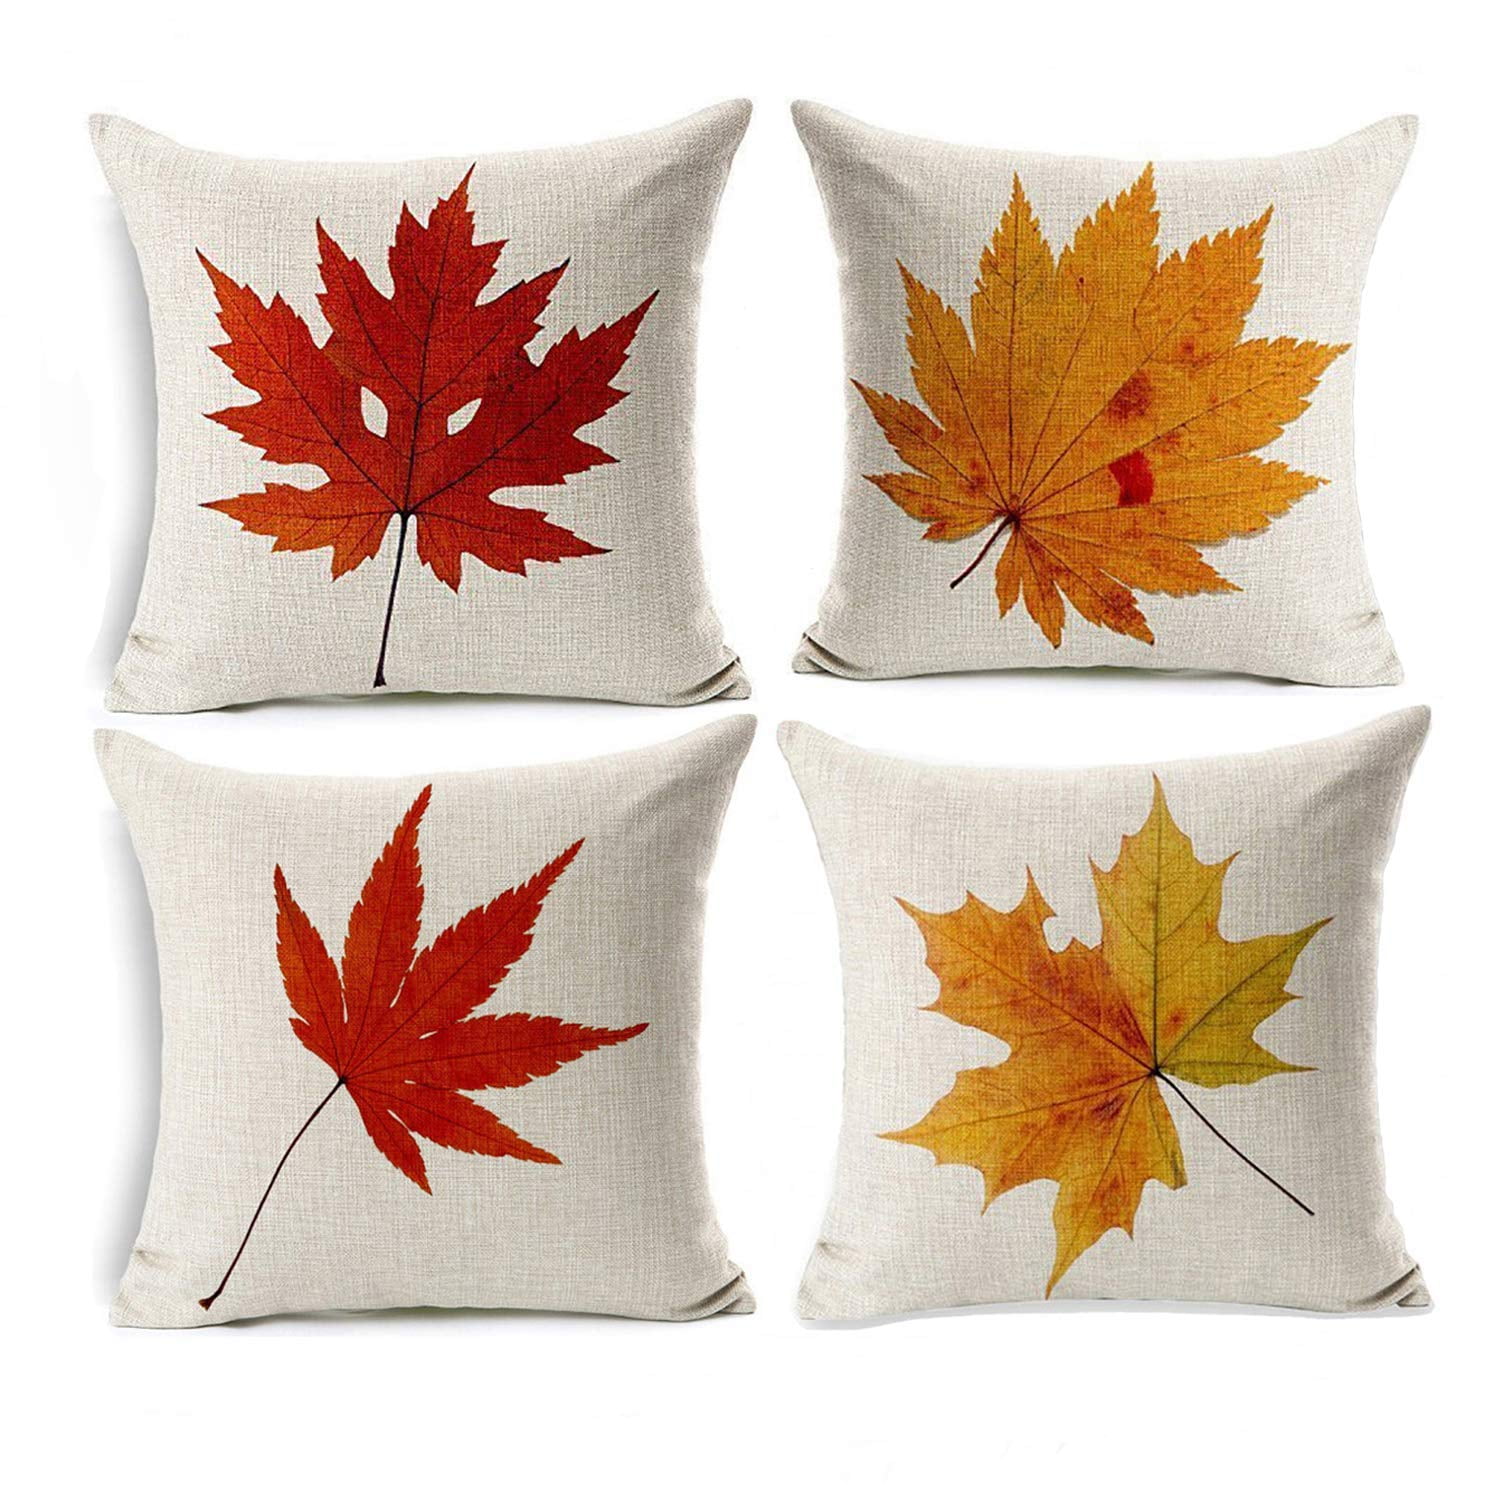 Fukeen Autumn Maple Leaf Decorative Pillow Cover Cotton Linen Rustic Farmhouse Decor Red Frame with Happy Fall Y’All Letters Words Throw Pillow Cases Standard Square 18x18 Inch Cushion Cover 